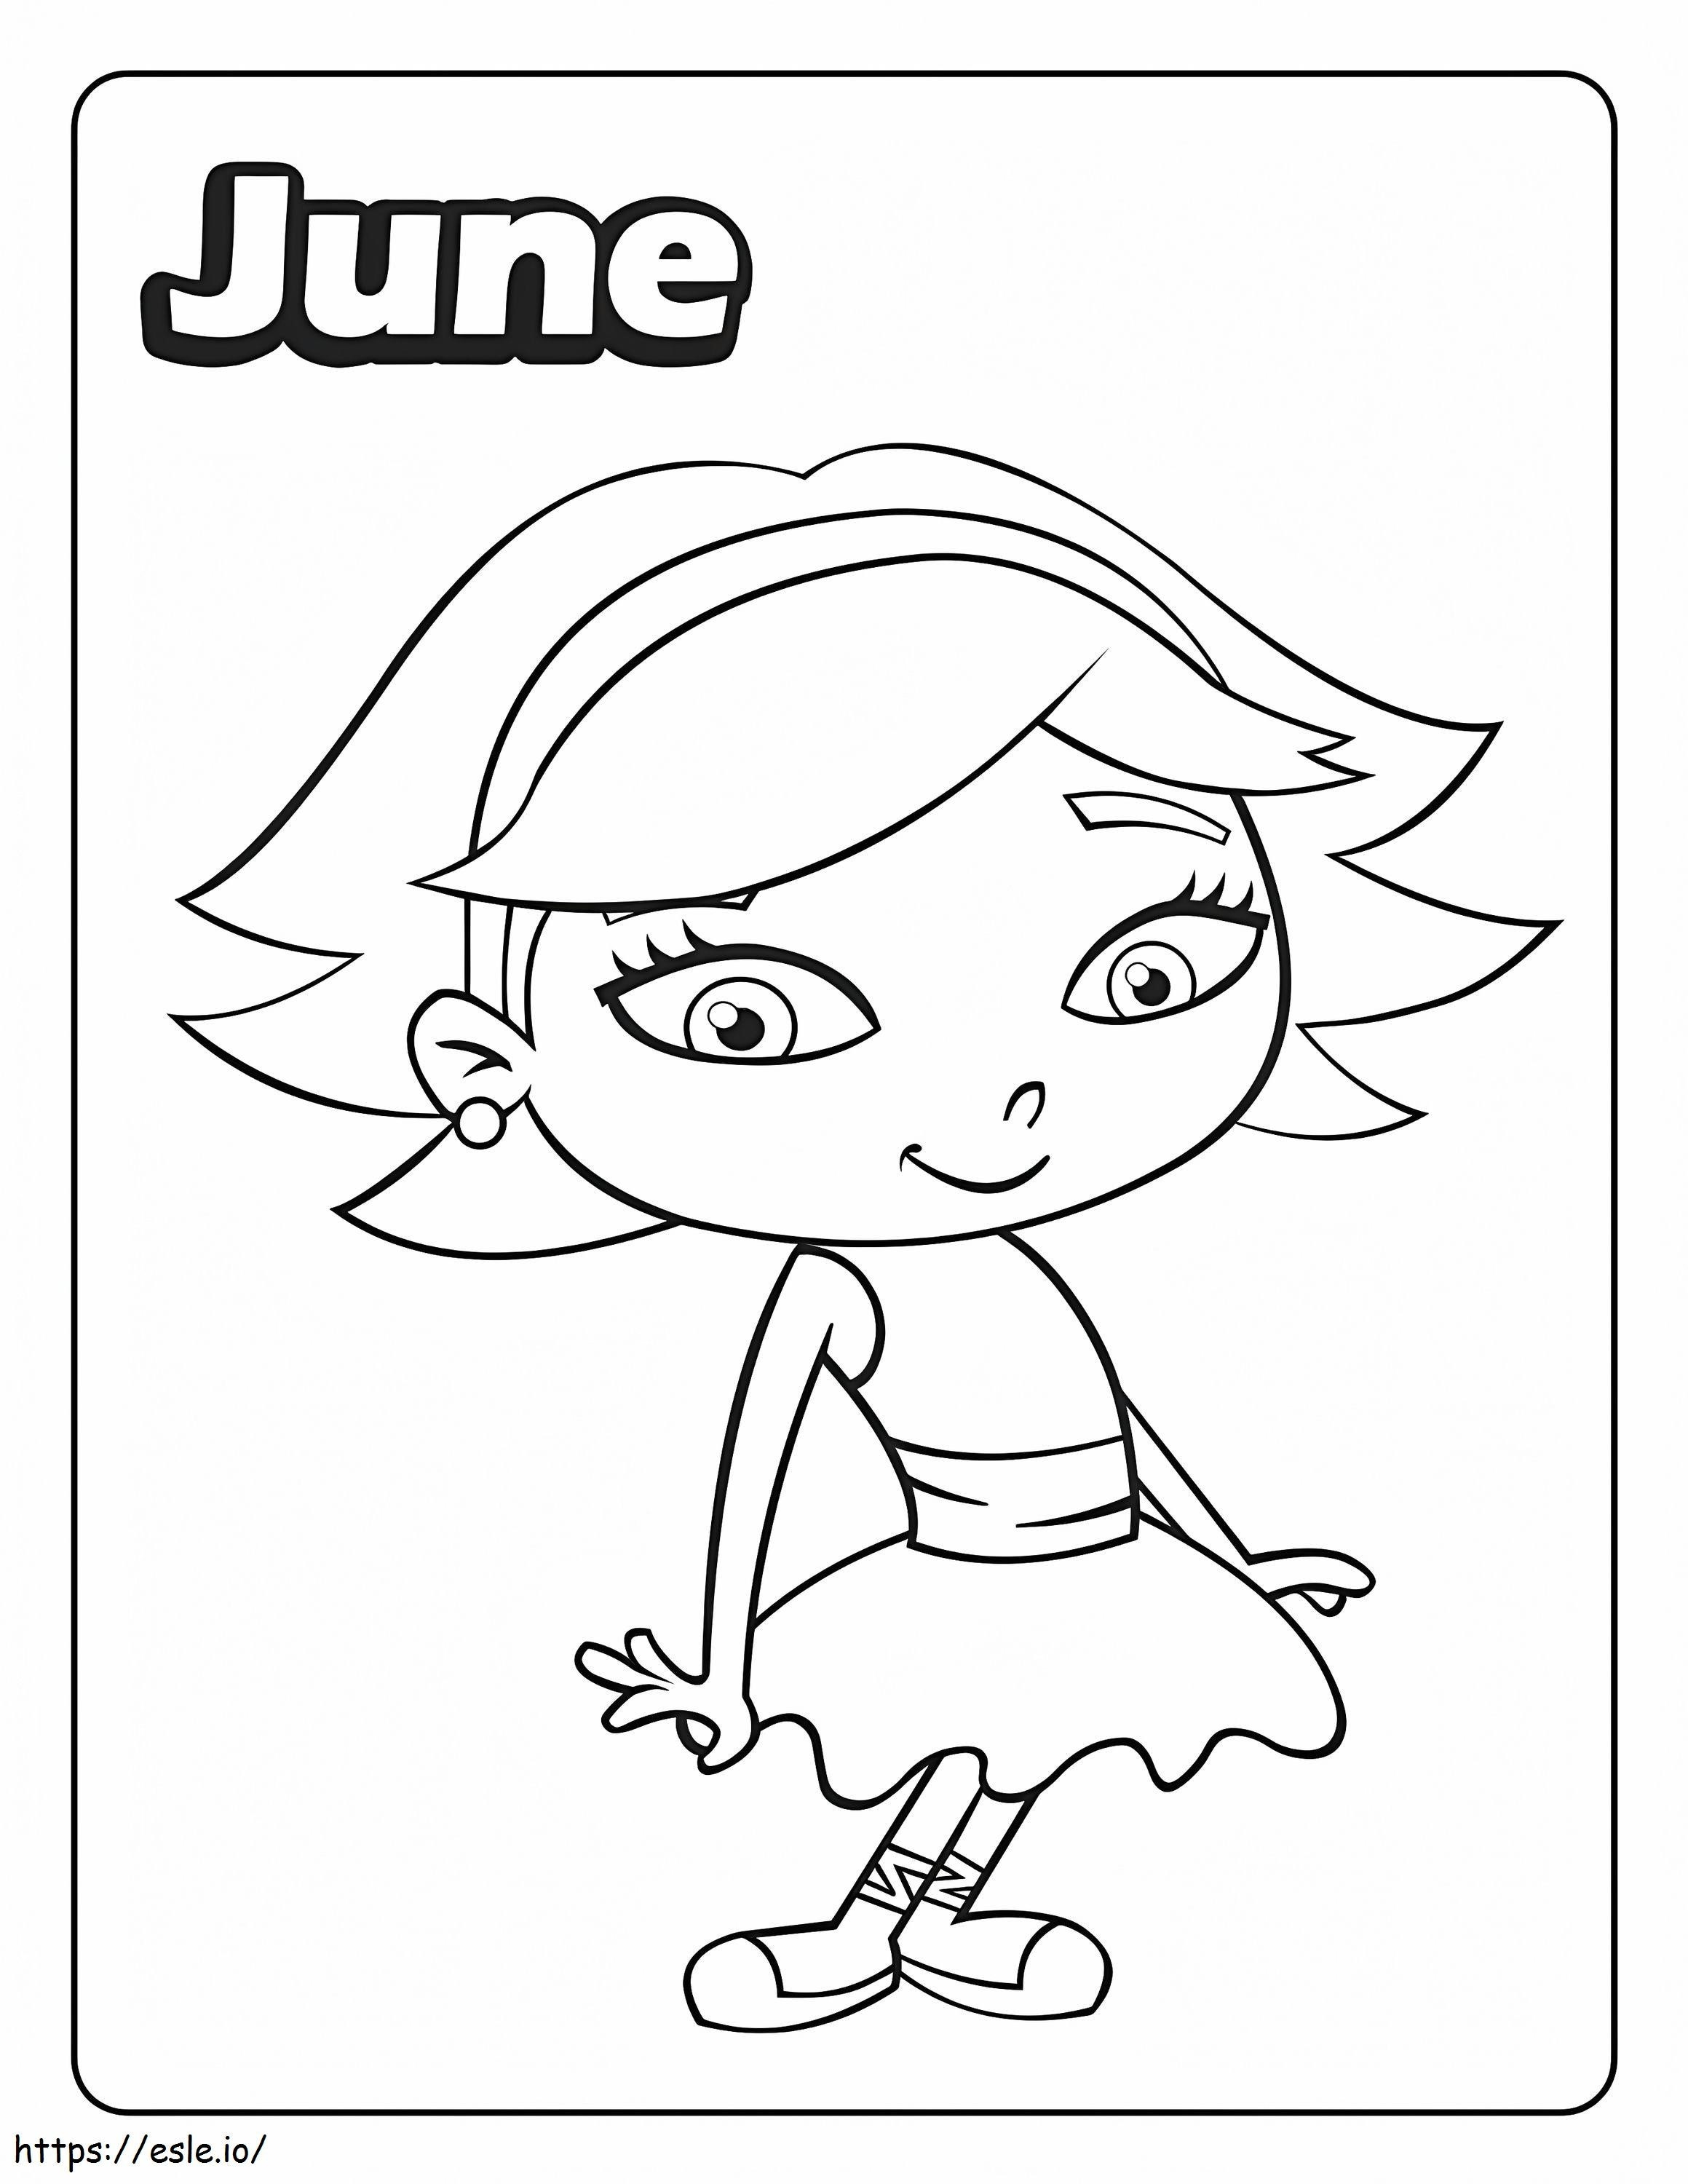 826044F2E38054Ee67048897F28976Aa coloring page